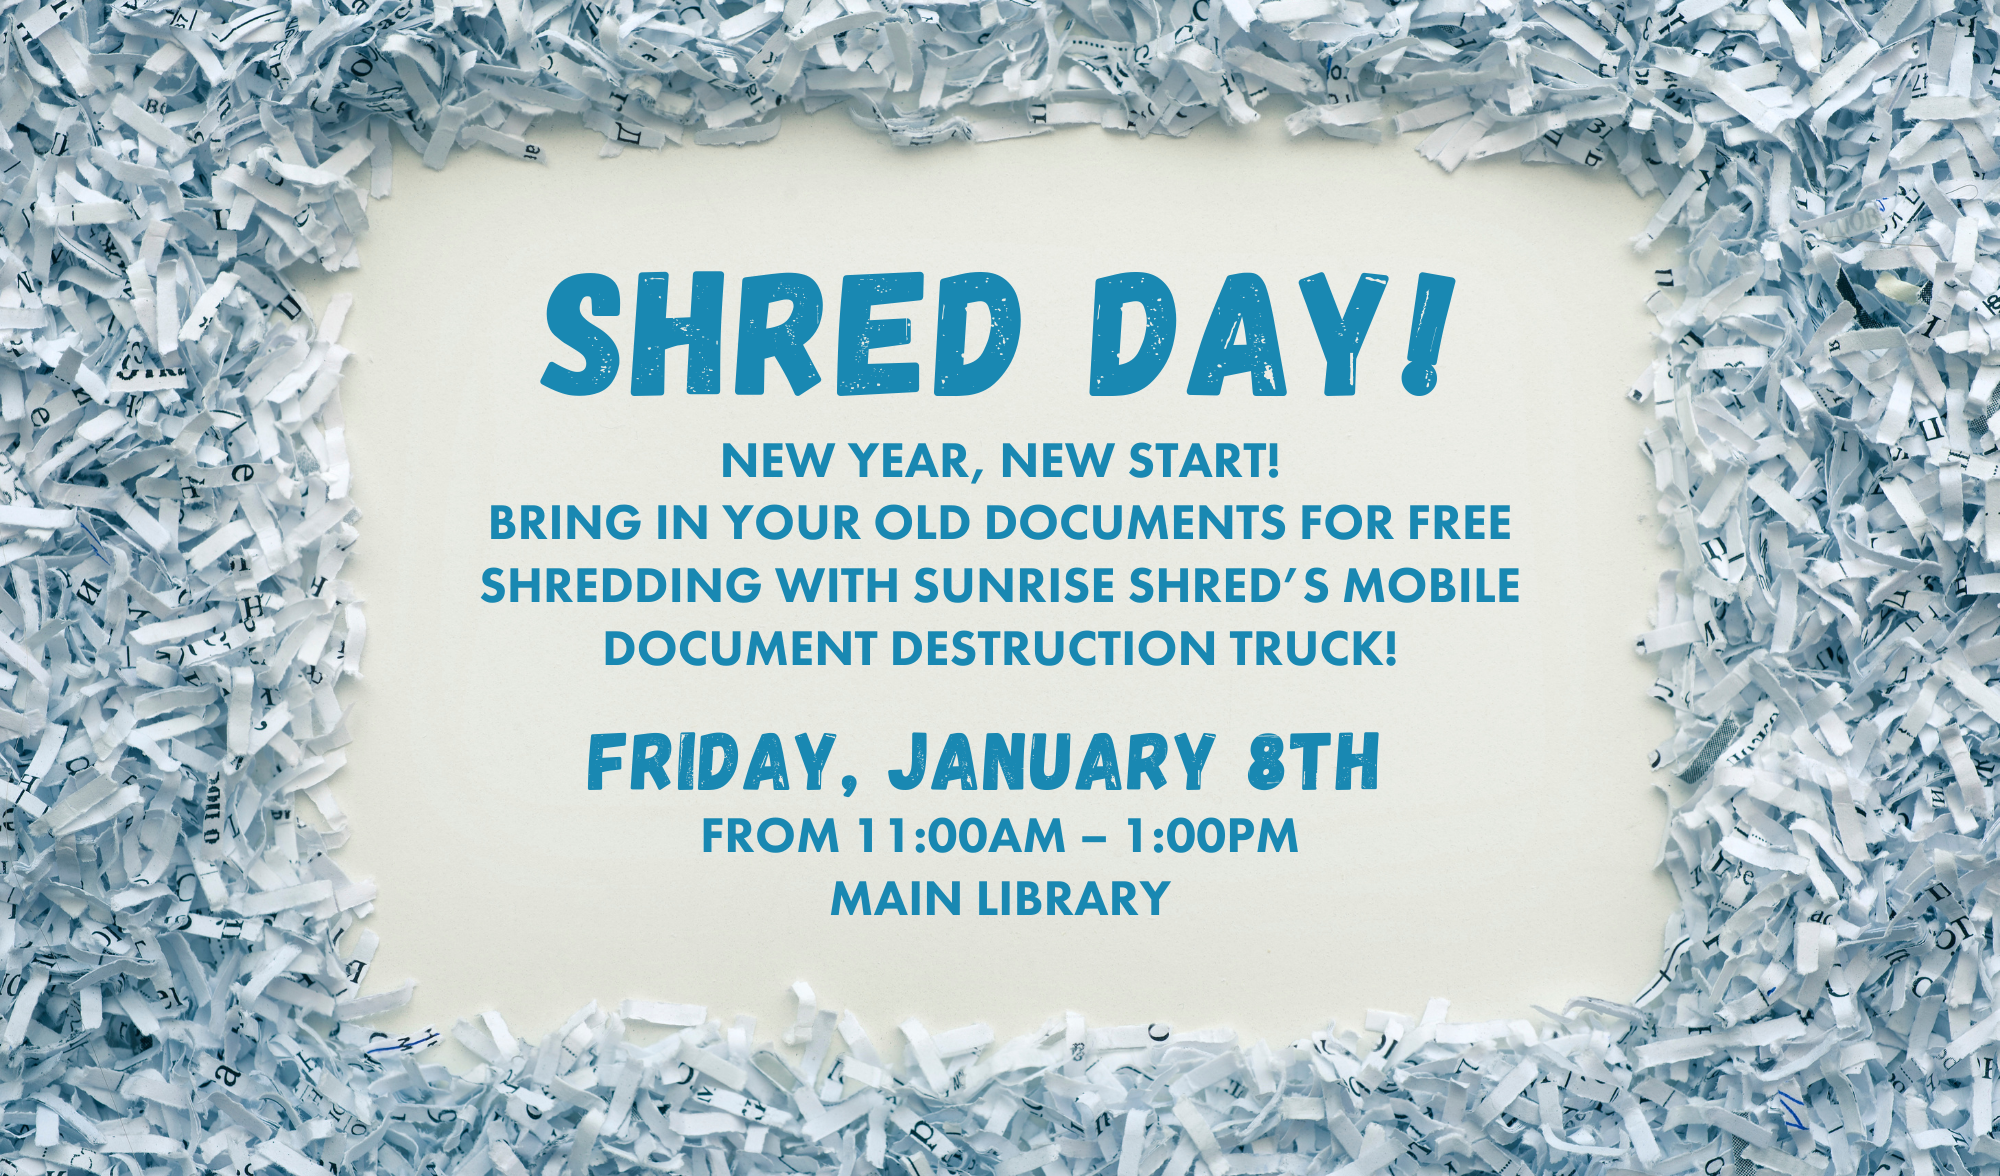 shred day 2021 documents